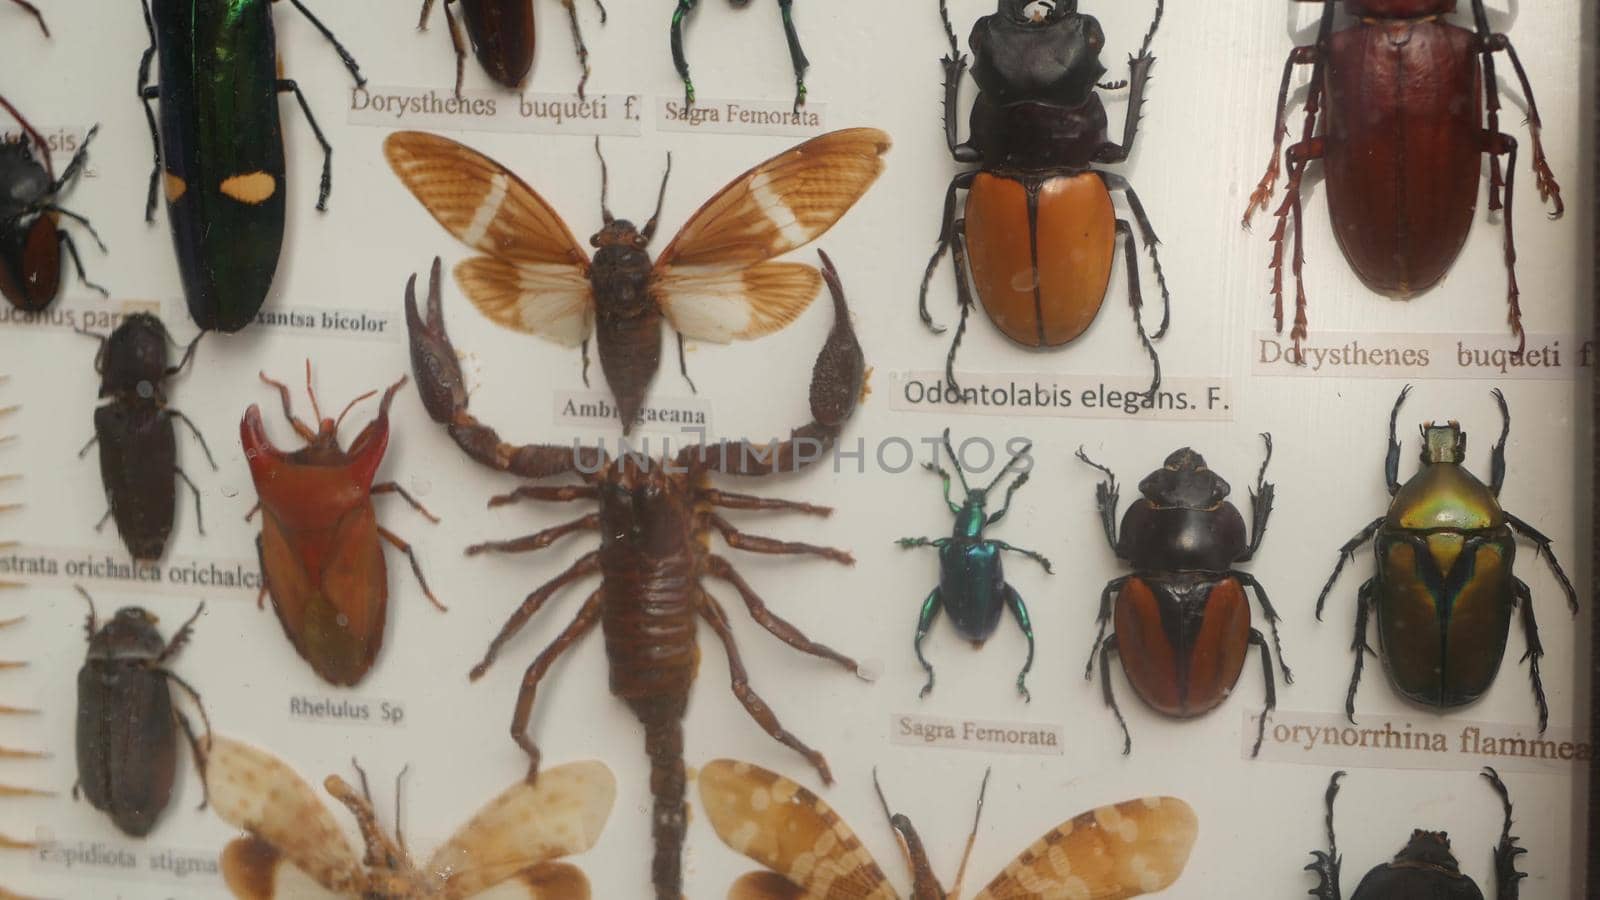 Collection of different insect pinned on canvas. Entomological collection of exotic beetles pinned on canvas with names of species by DogoraSun